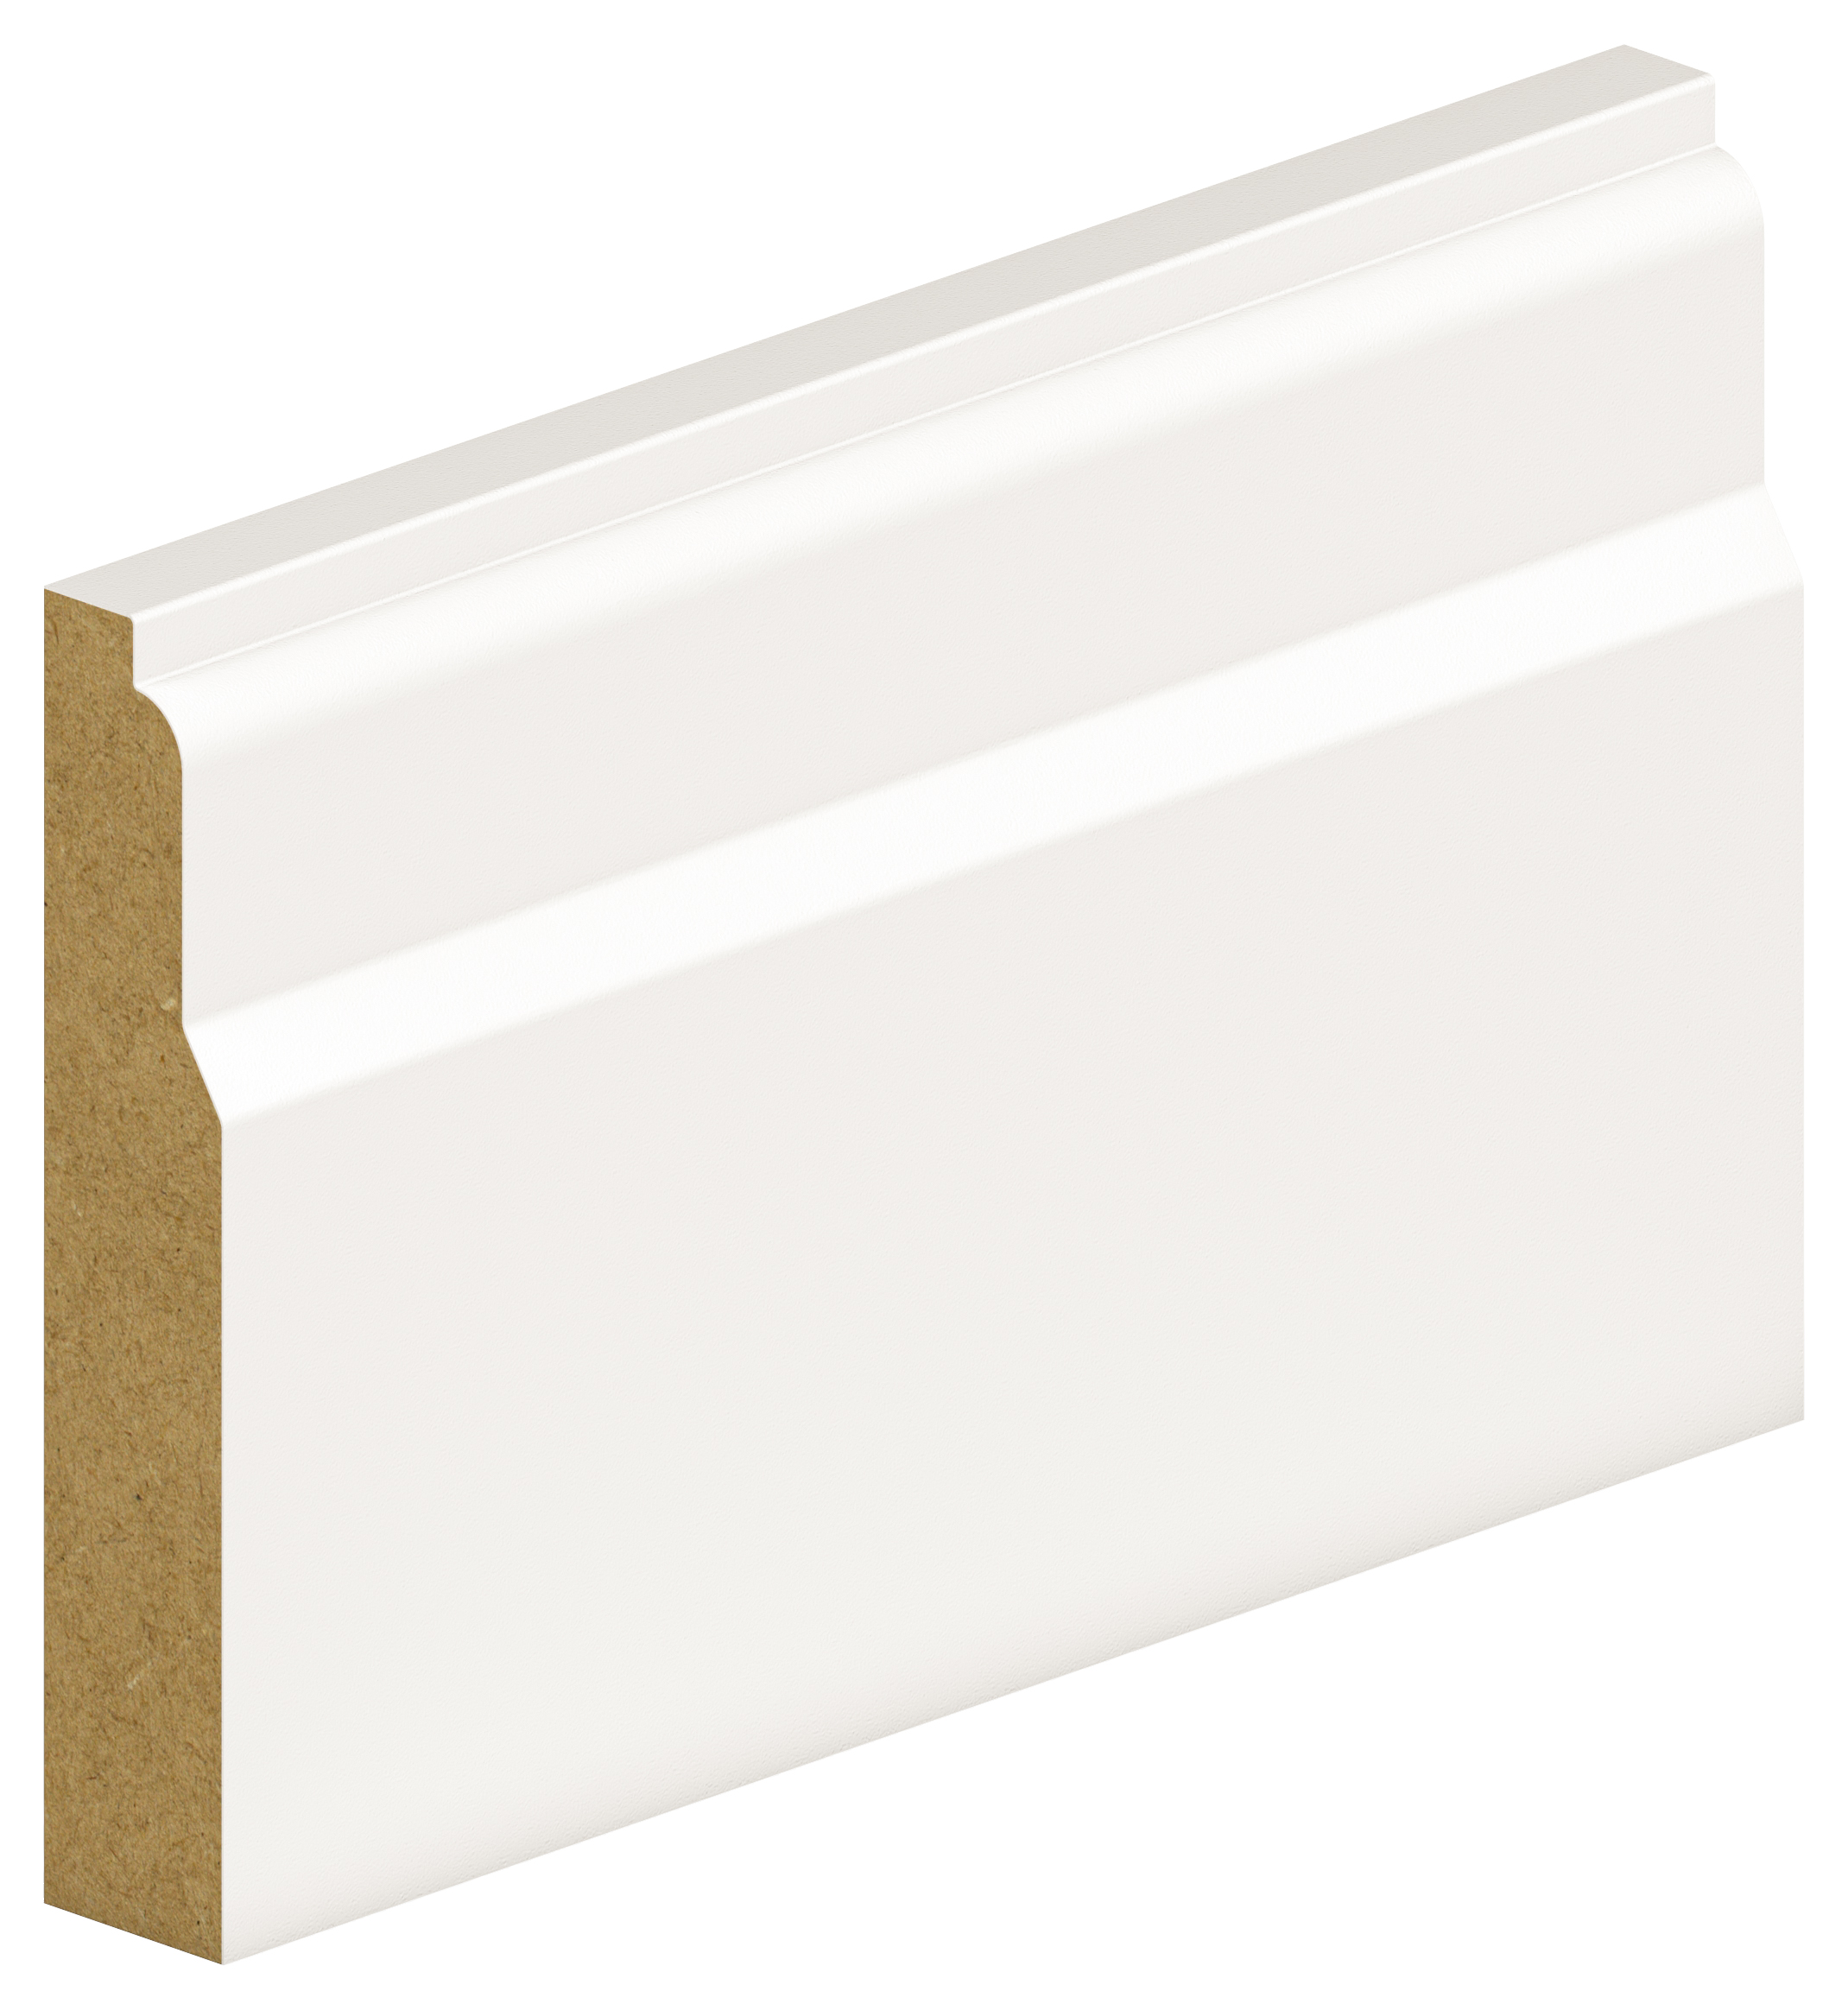 Image of Lambs Tongue Primed MDF Architrave - 18 x 69 x 2100mm - Pack of 5